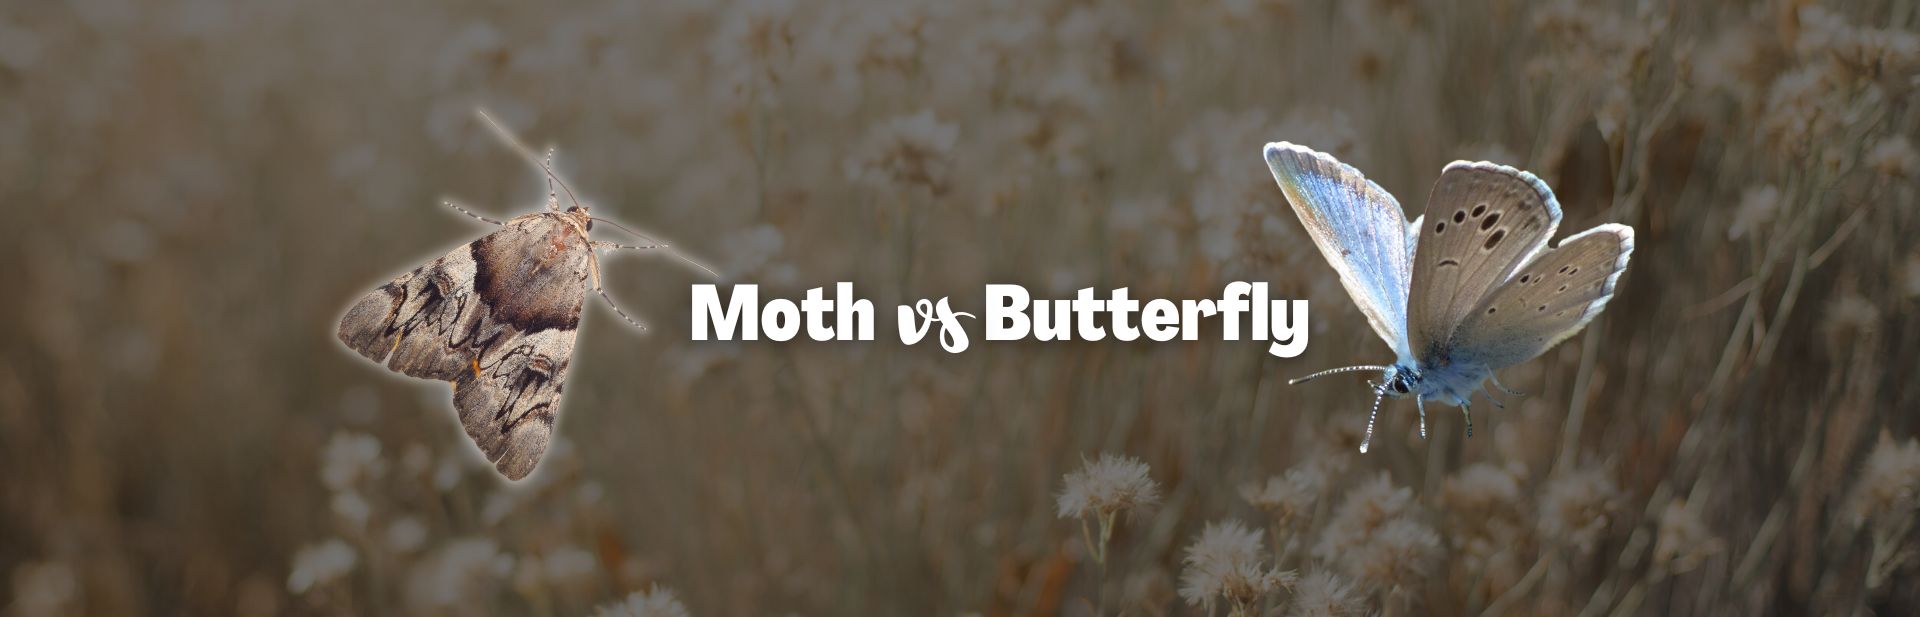 Moth vs Butterfly: How Are They Different?